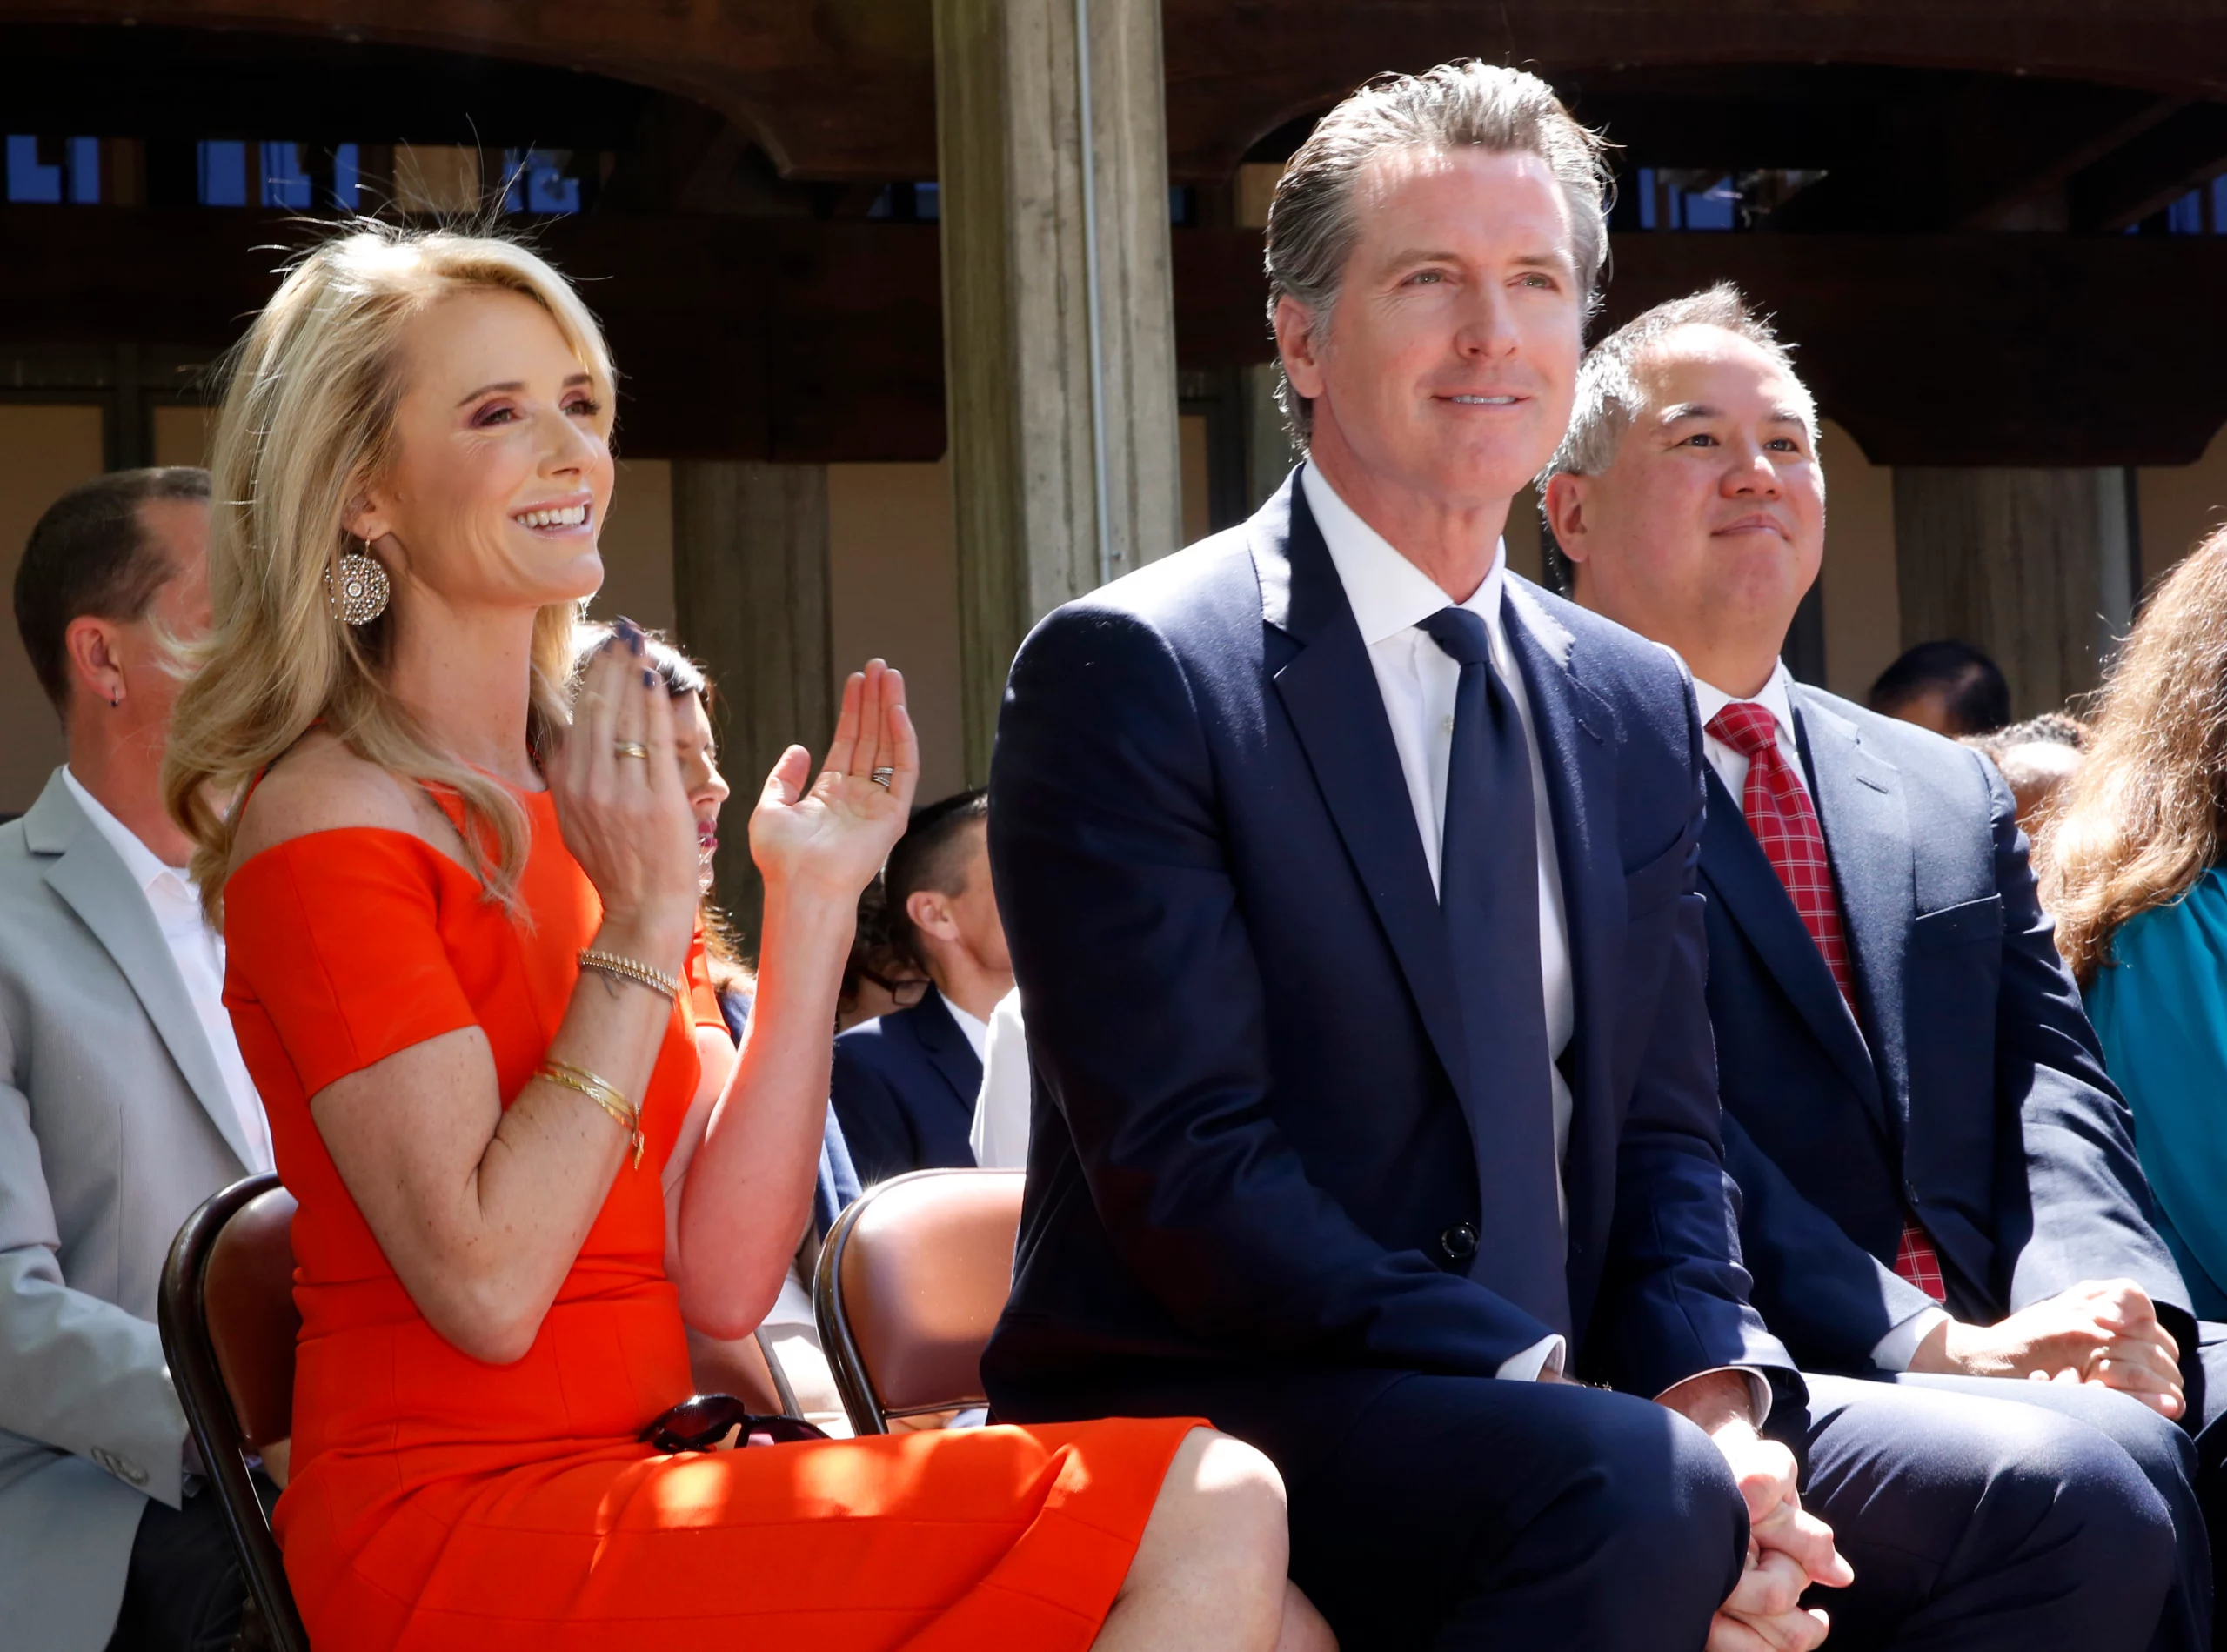 Gavin Newsom Has Solicited Millions In Donations To His Wife’s Charity, Left-Wing Orgs, Records Show